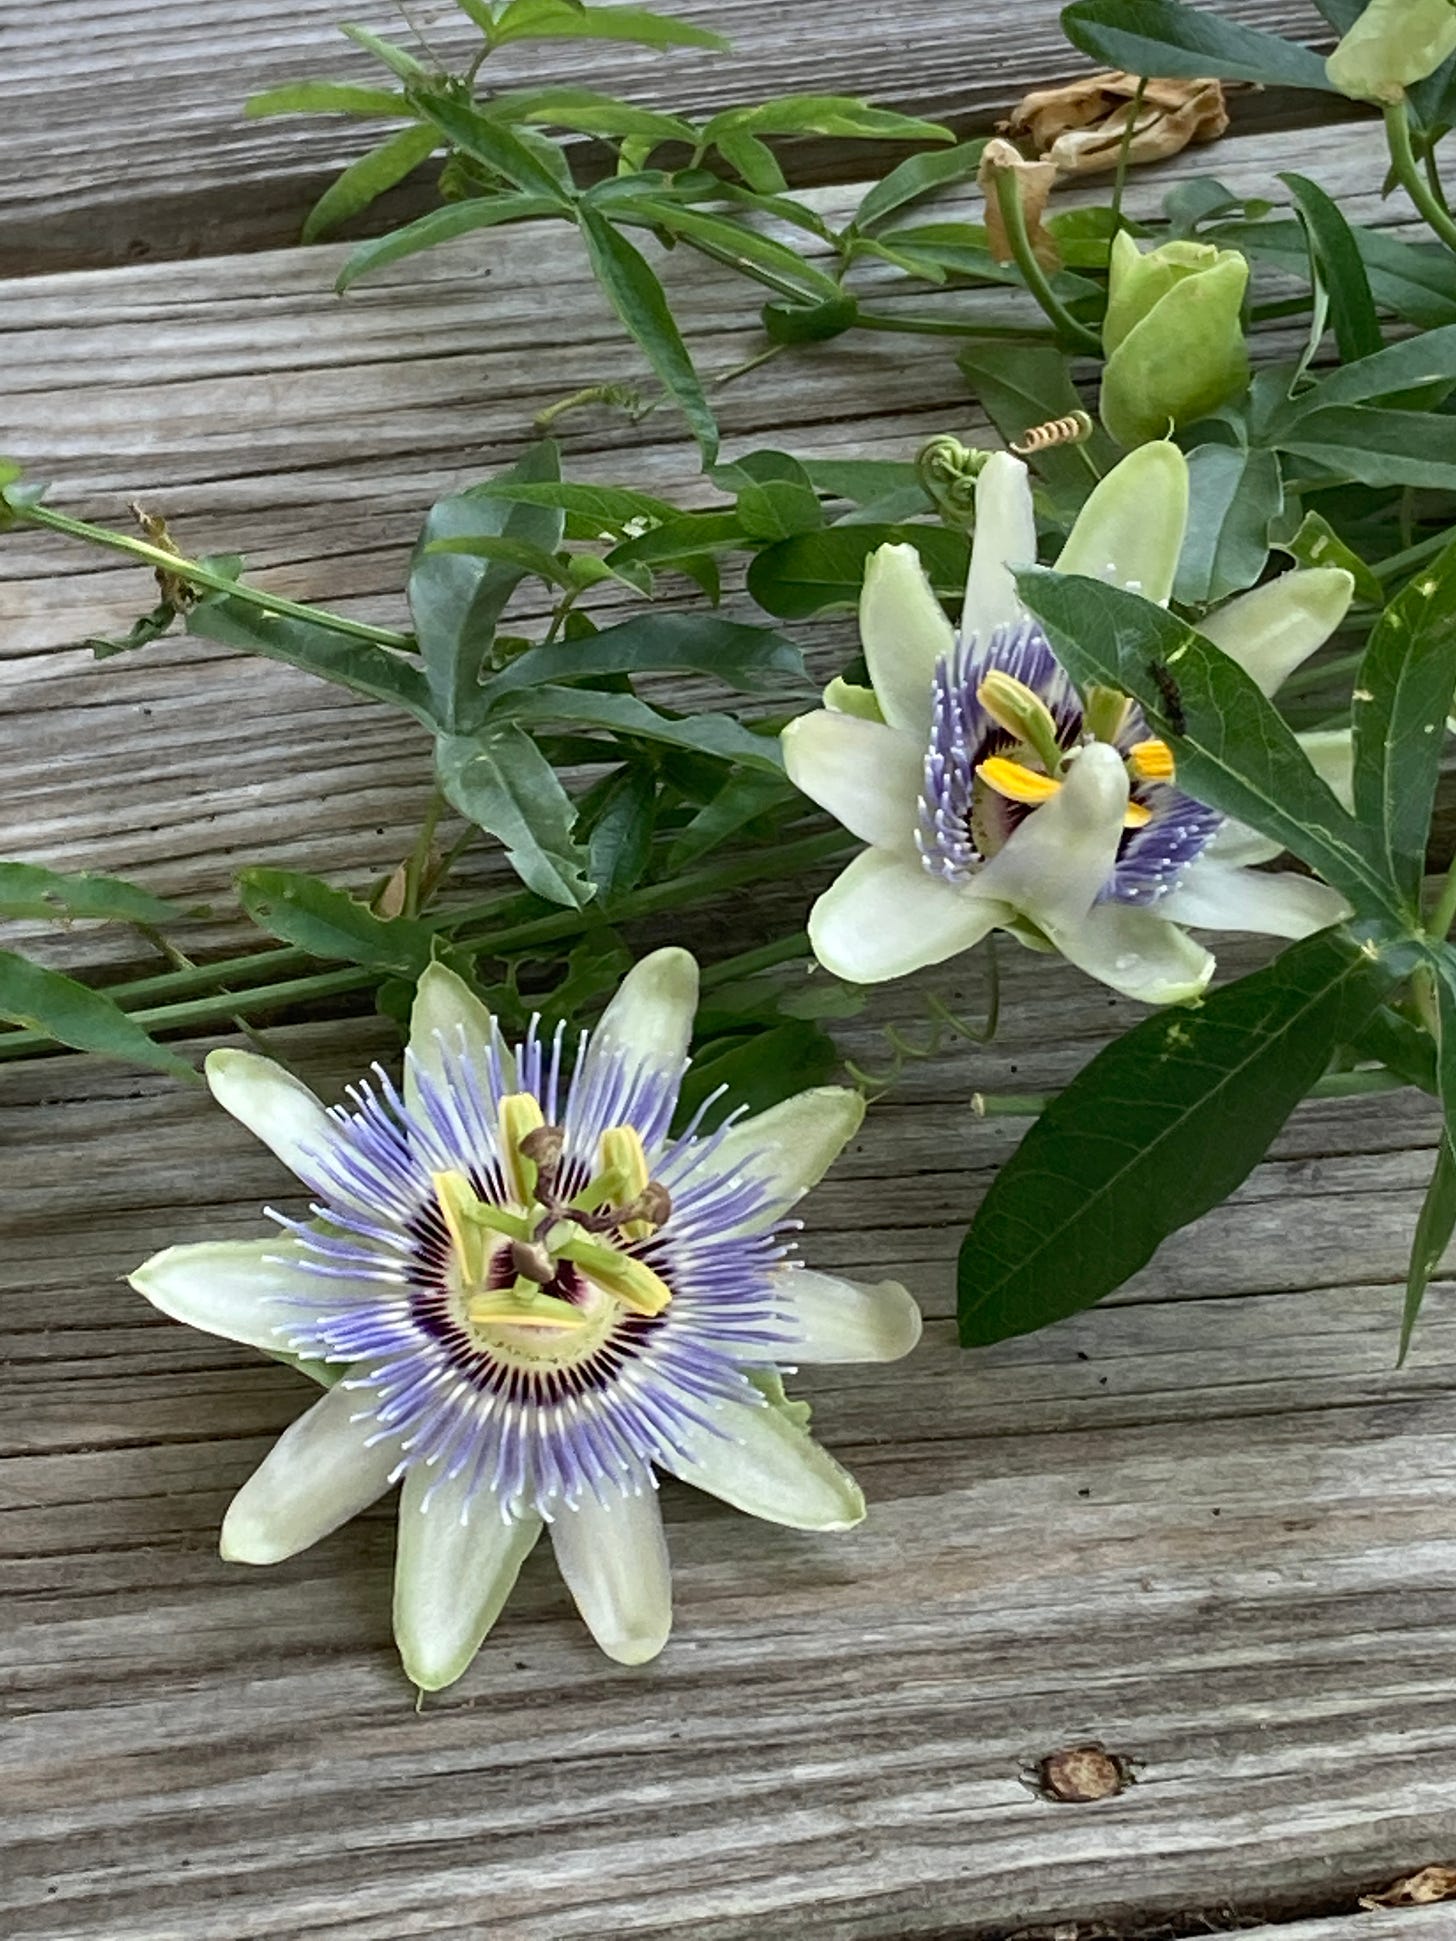 Two passionflowers with vines on a wooden deck at the beach (Kitty Hawk)